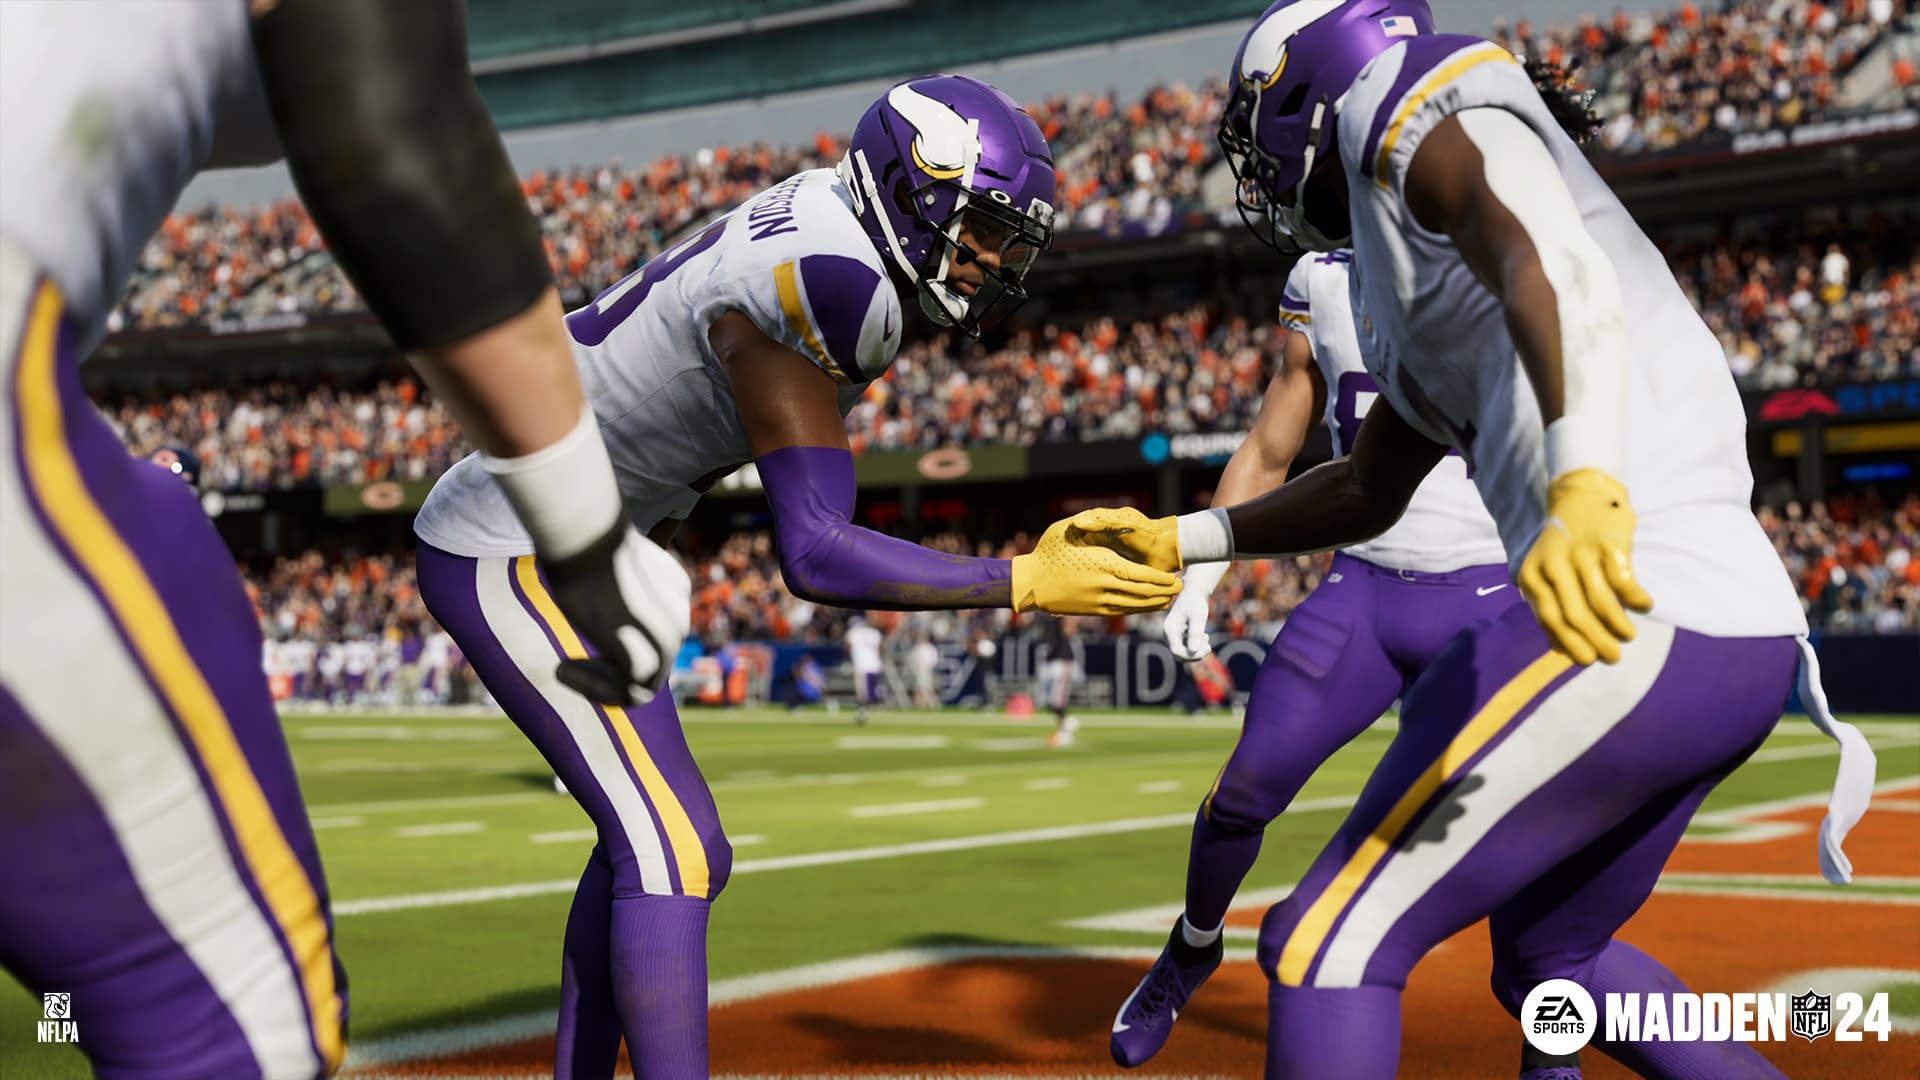 EA Play Rewards for Madden NFL 24 Players - Electronic Arts